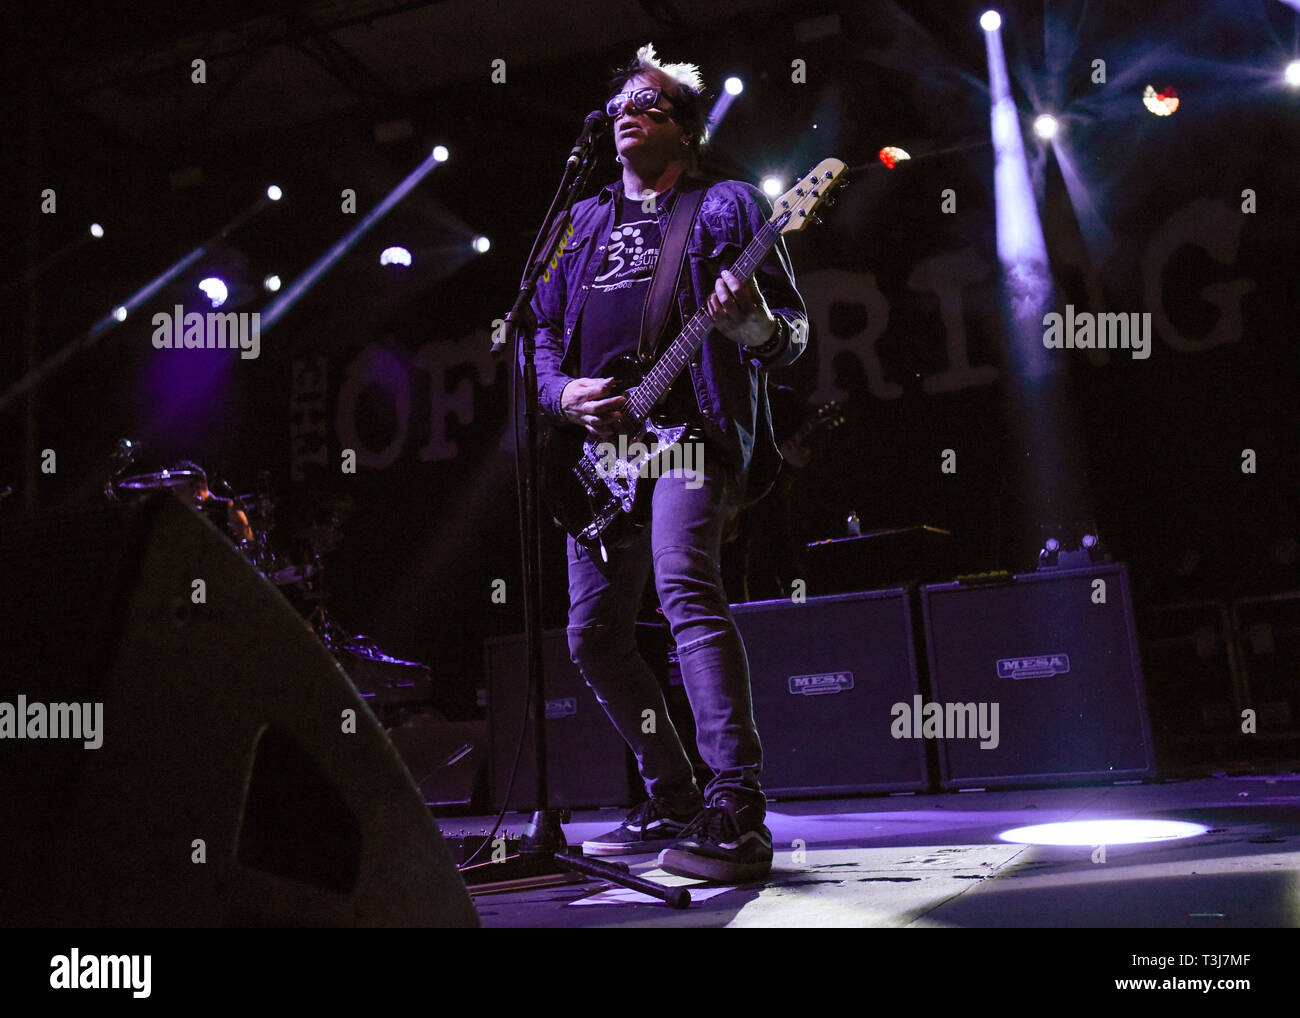 April 7, 2019 - Dana Point, California, USA - Lead guitist NOODLES (Kevin John Wasserman) of The Offspring performs at the Sabroso Craft Beer, Taco & Music Festival 2019 Sunday (Day 2) at Doheny State Beach in Dana Point, California. (Credit Image: © Billy Bennight/ZUMA Wire) Stock Photo